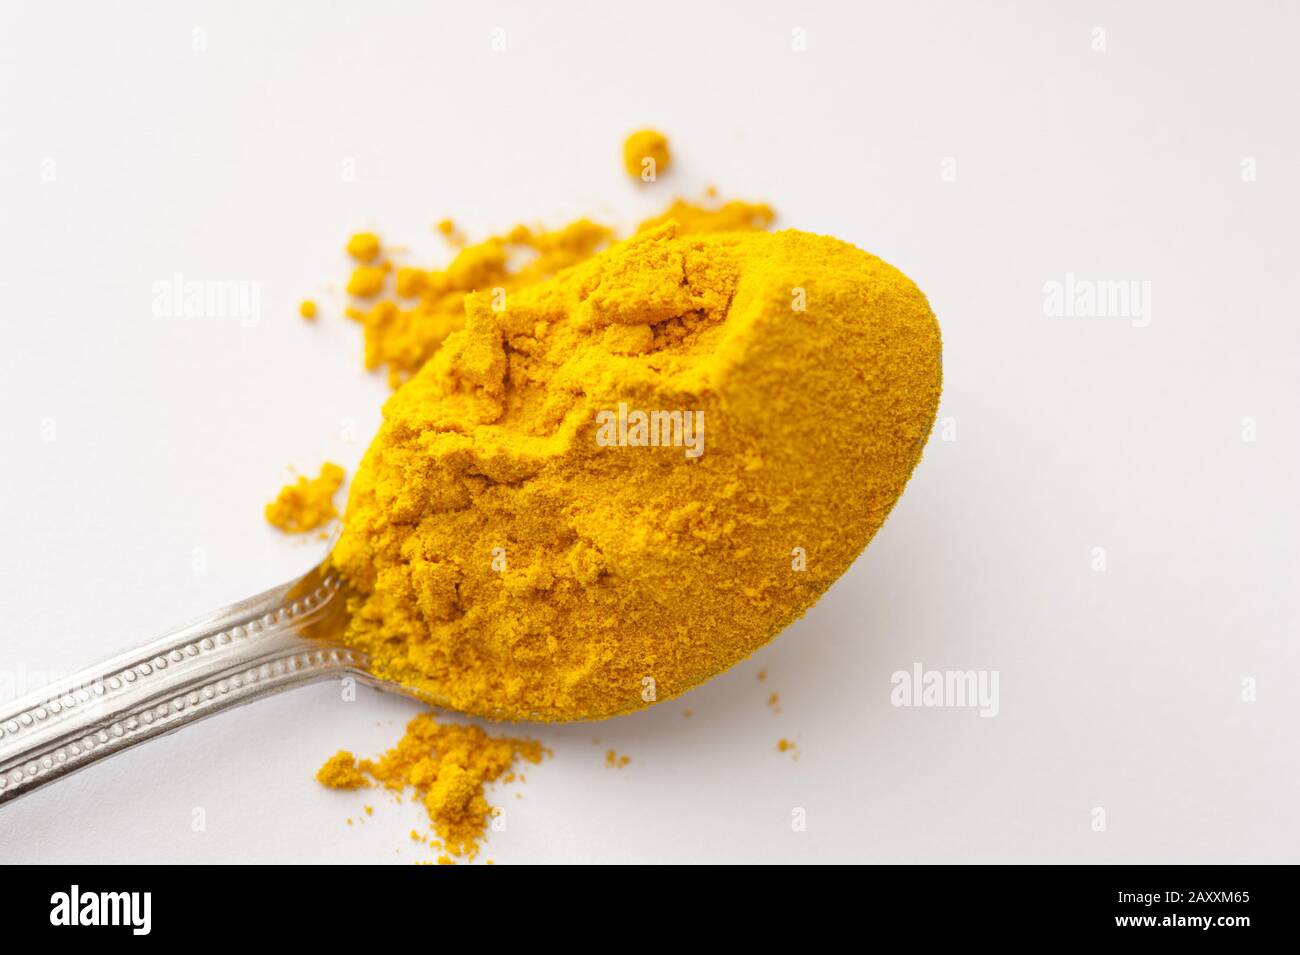 Silver teaspoon heaped with ground dried turmeric powder over a white background with copy space Stock Photo